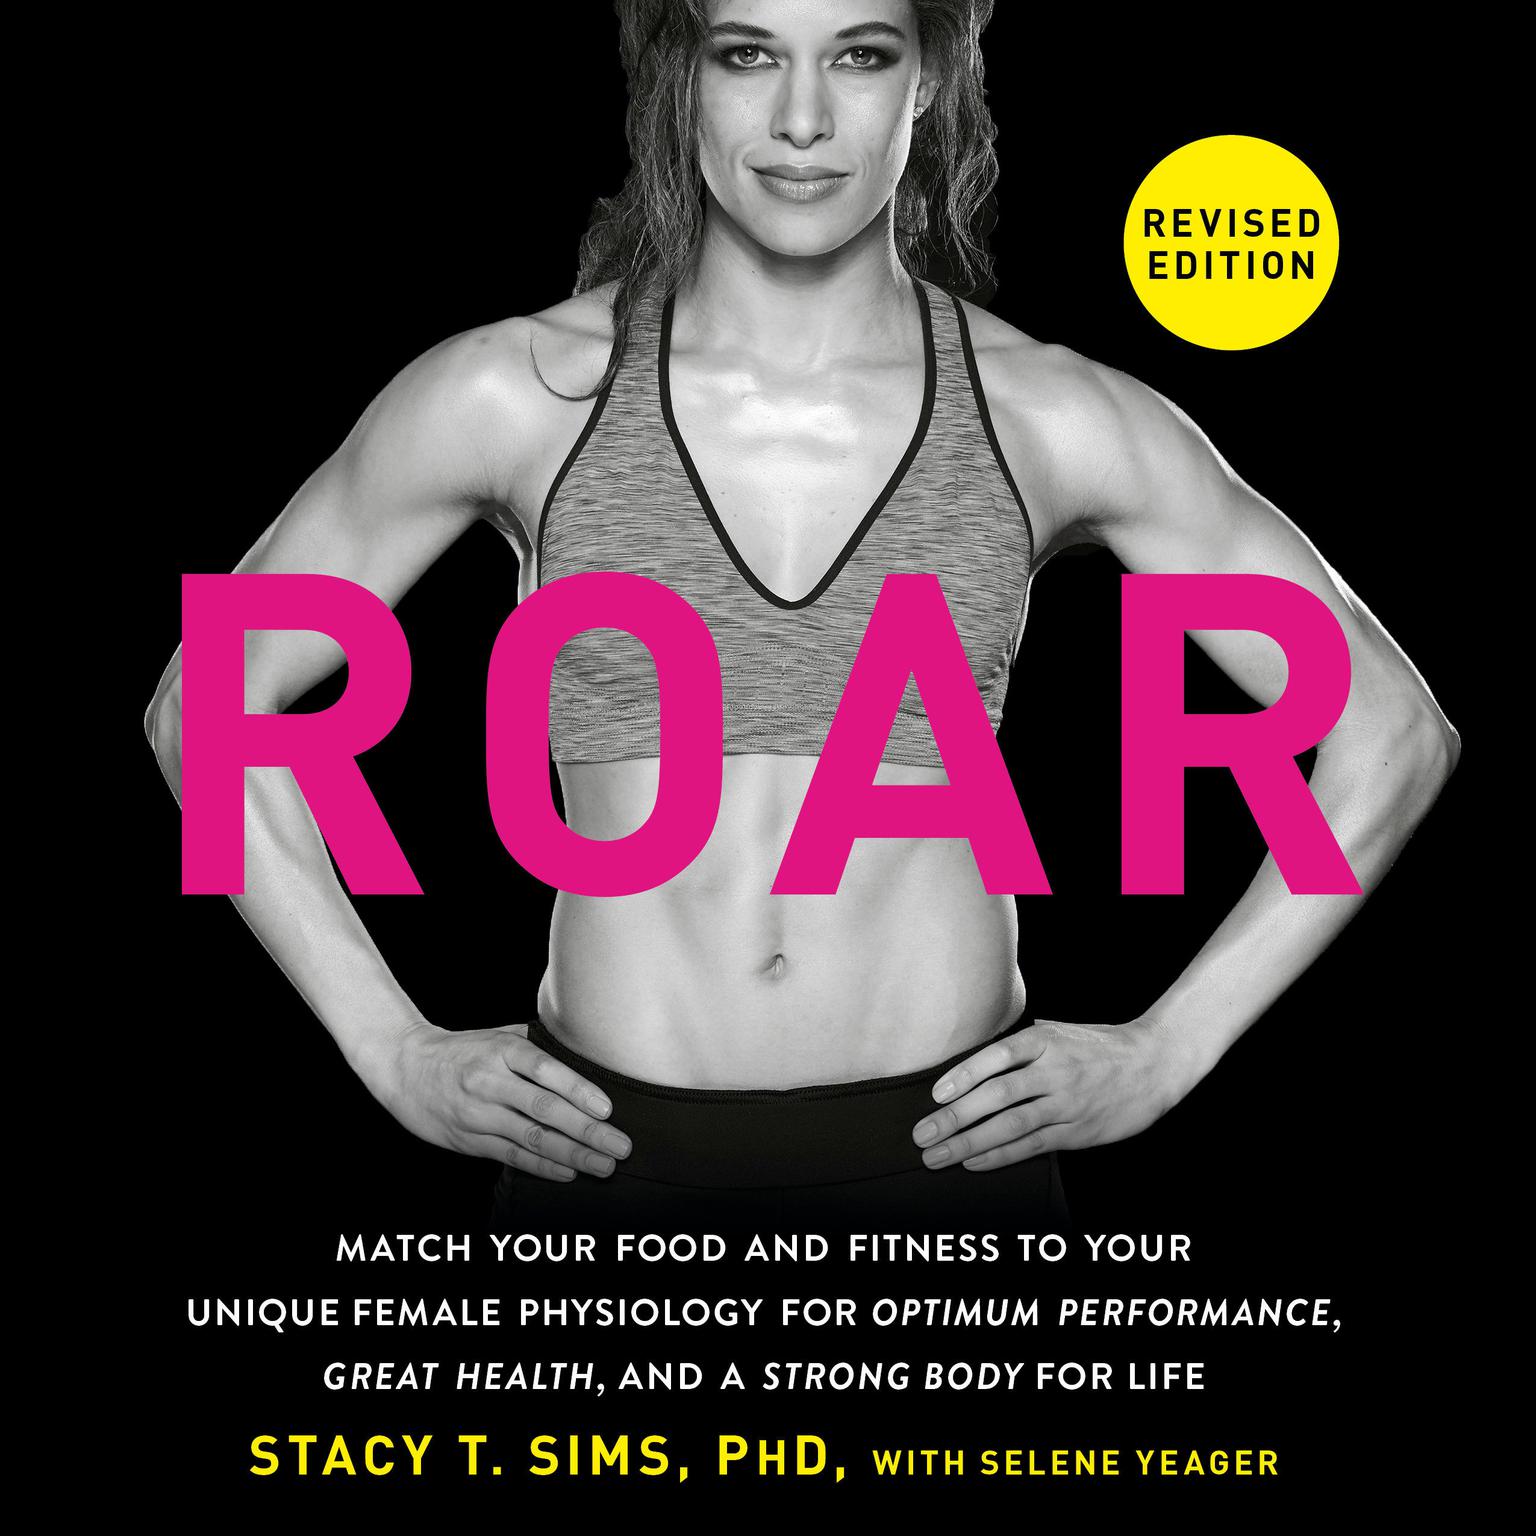 ROAR, Revised Edition: Match Your Food and Fitness to Your Unique Female Physiology for Optimum Performance, Great Health, and a Strong Body for Life Audiobook, by Stacy T. Sims